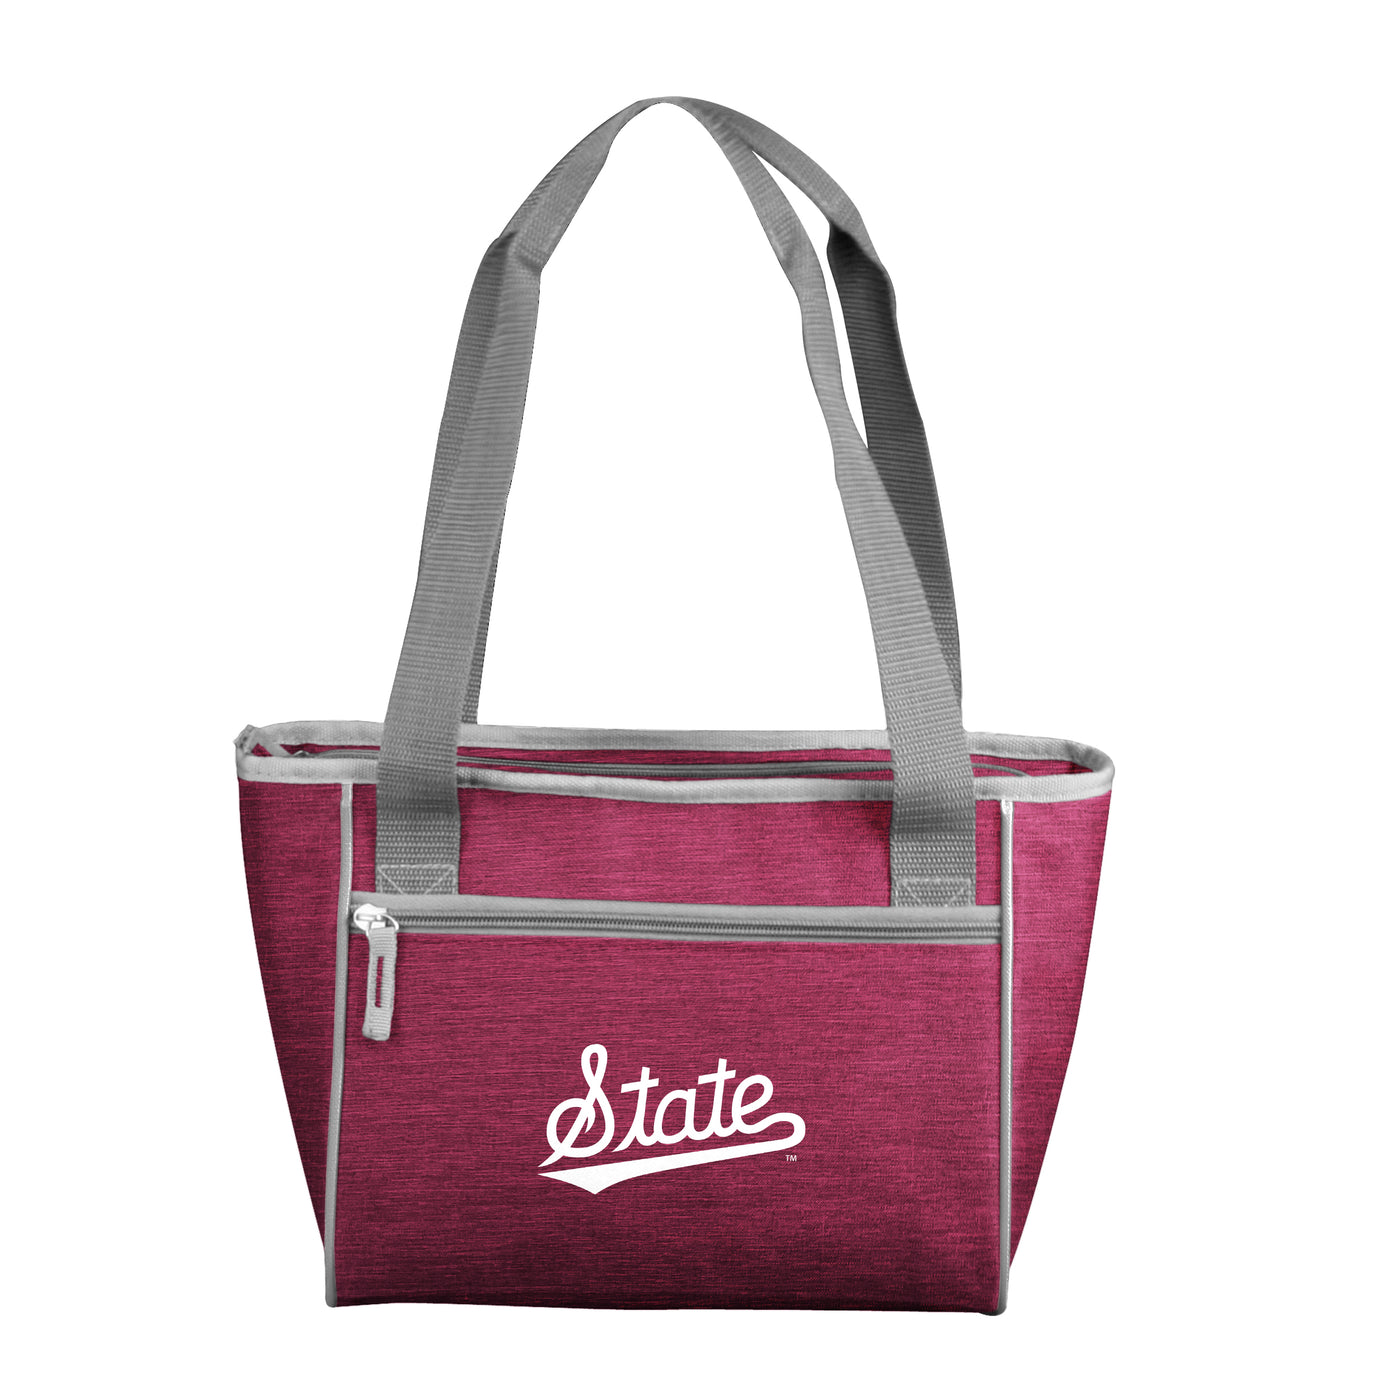 Mississippi State Script 16 Can Cooler Tote